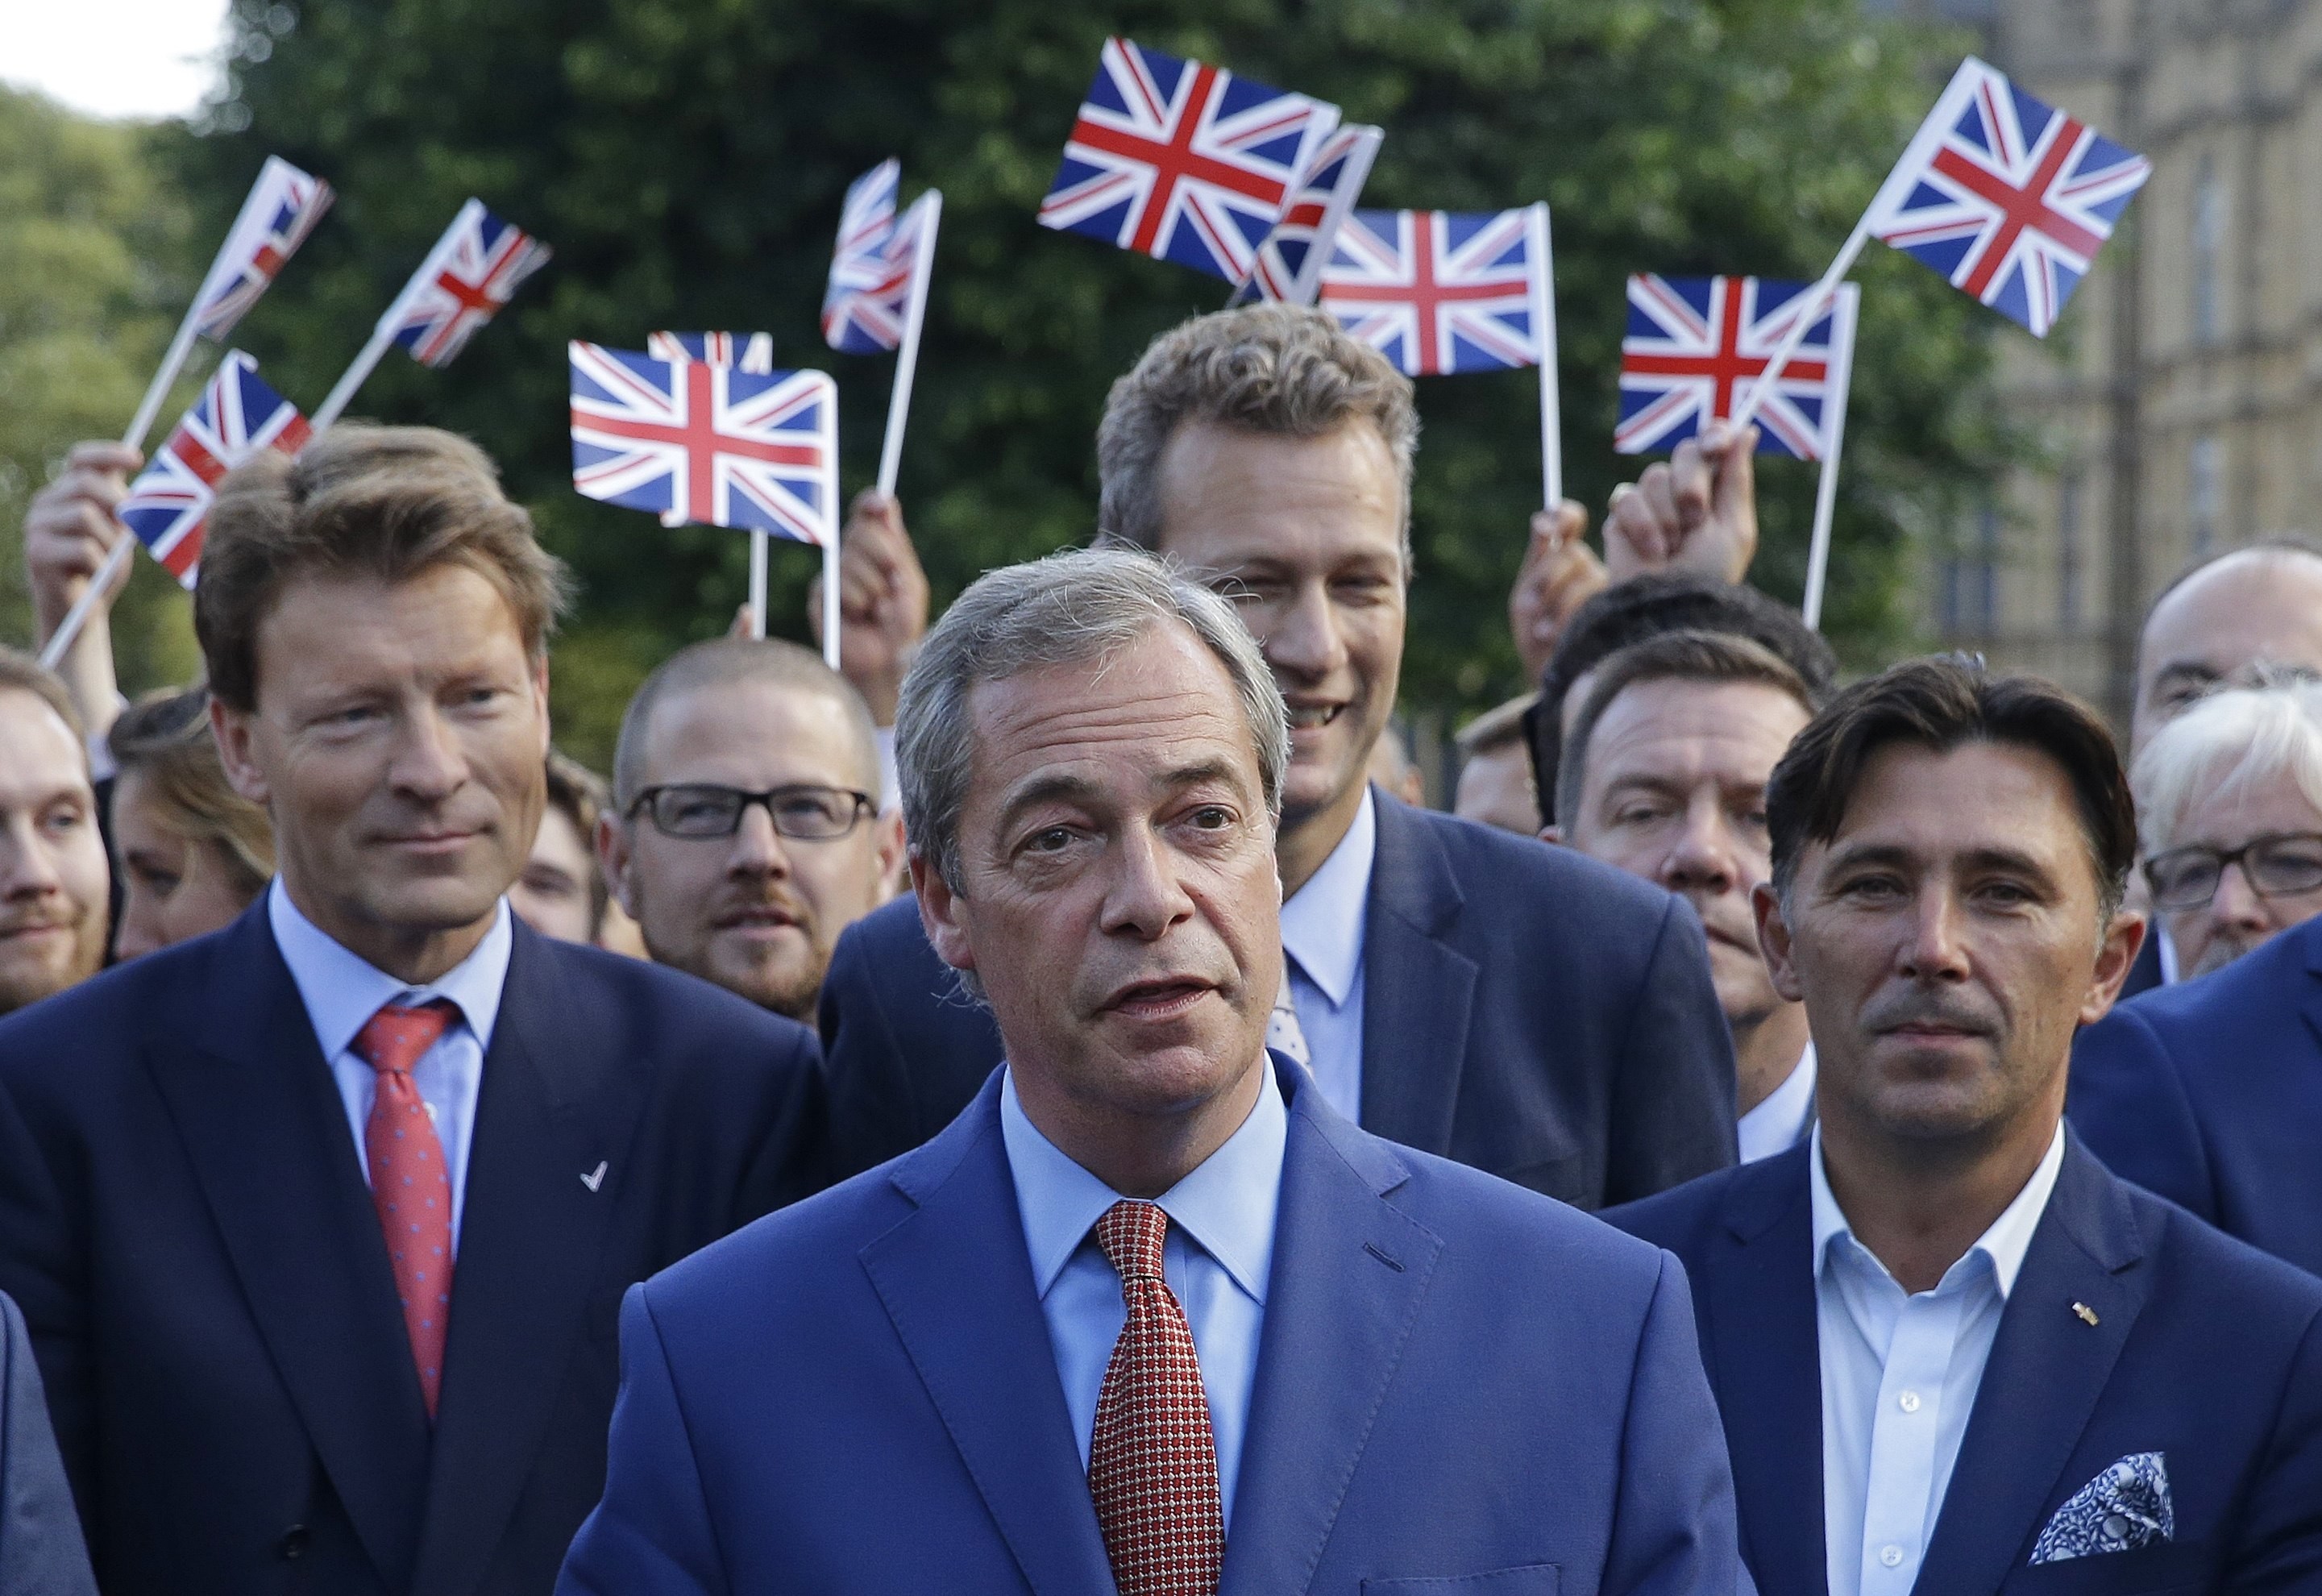 Nigel Farage, then leader of the UK Independence Party, speaks to the media in London a week before the vote on Brexit in June 2016. Farage said this week that he might support a second referendum on Britain's European Union membership to kill off any prospect of staying in the bloc. Photo: AP